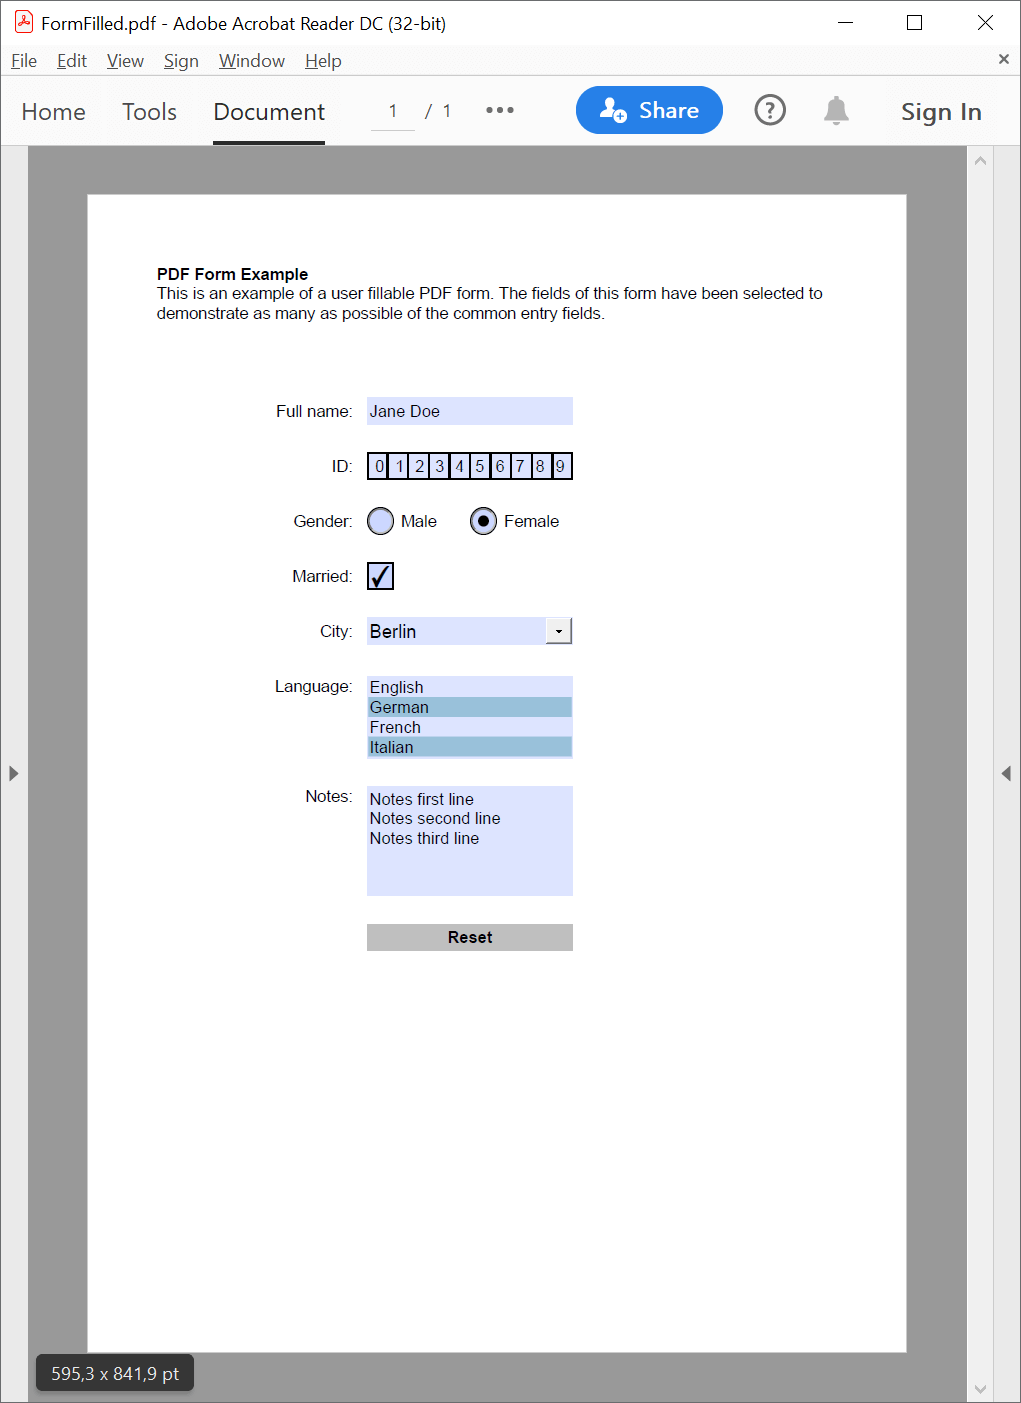 PDF interactive form filled in with GemBox.Pdf